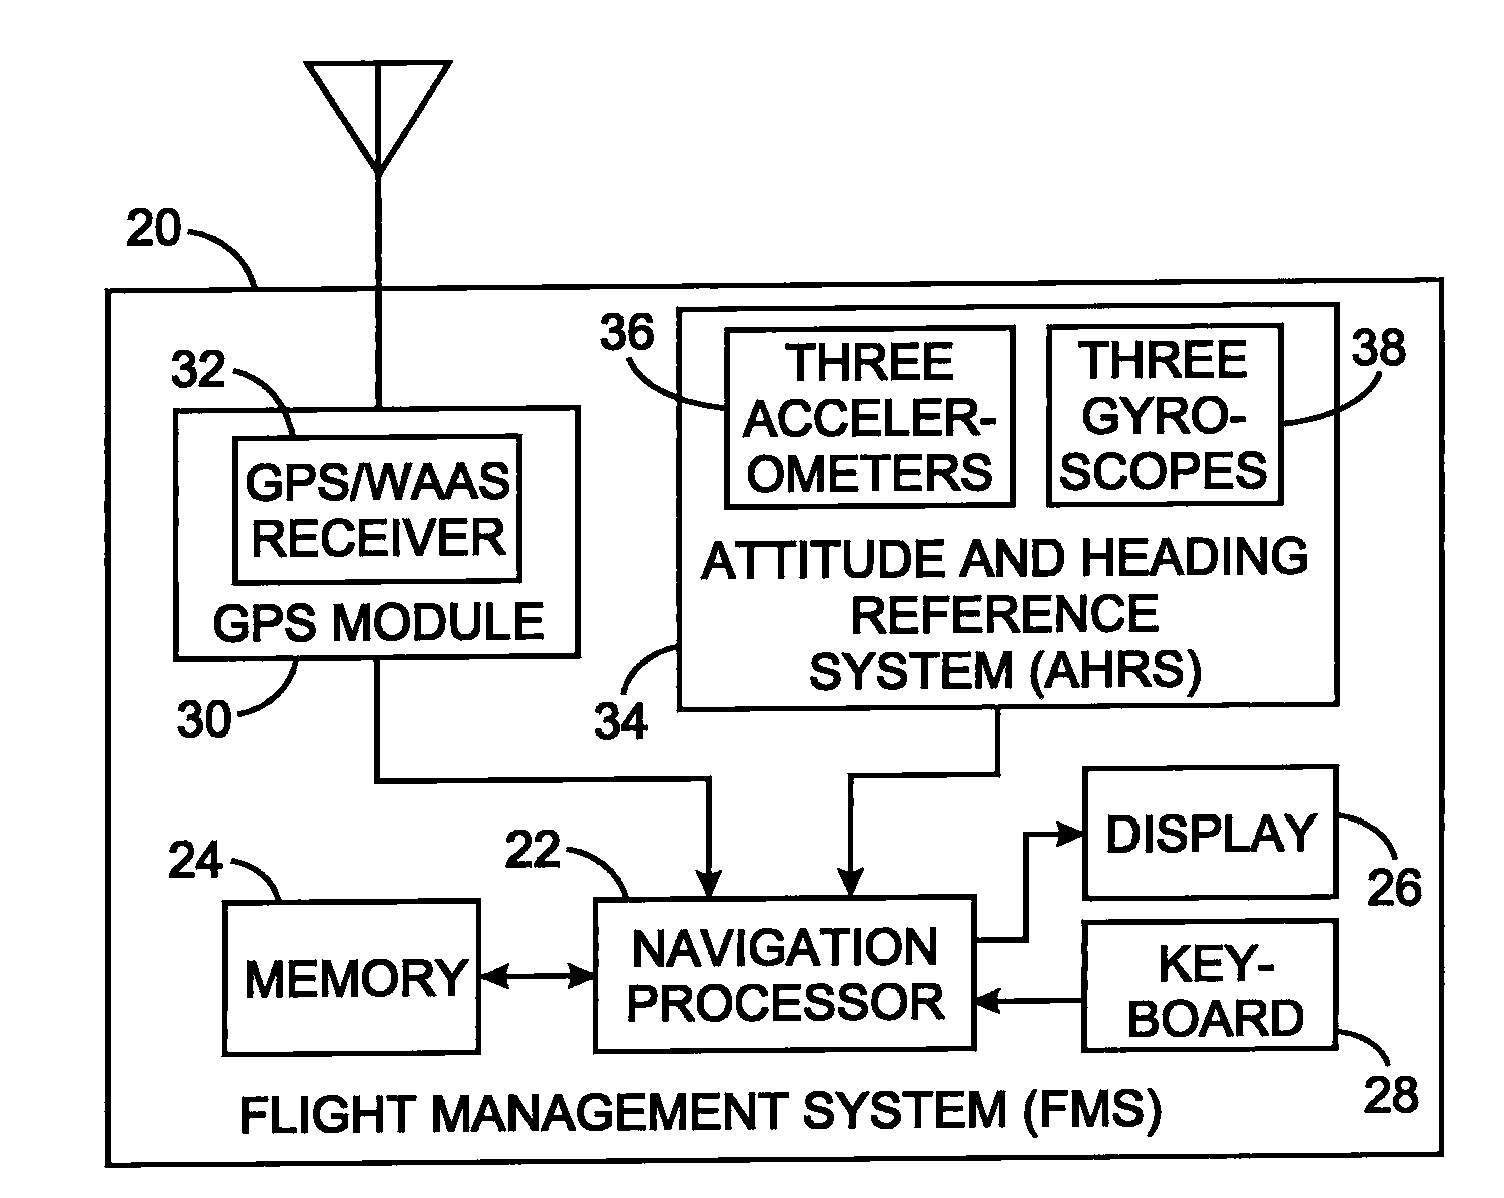 Aircraft navigation using the global positioning system and an attitude and heading reference system